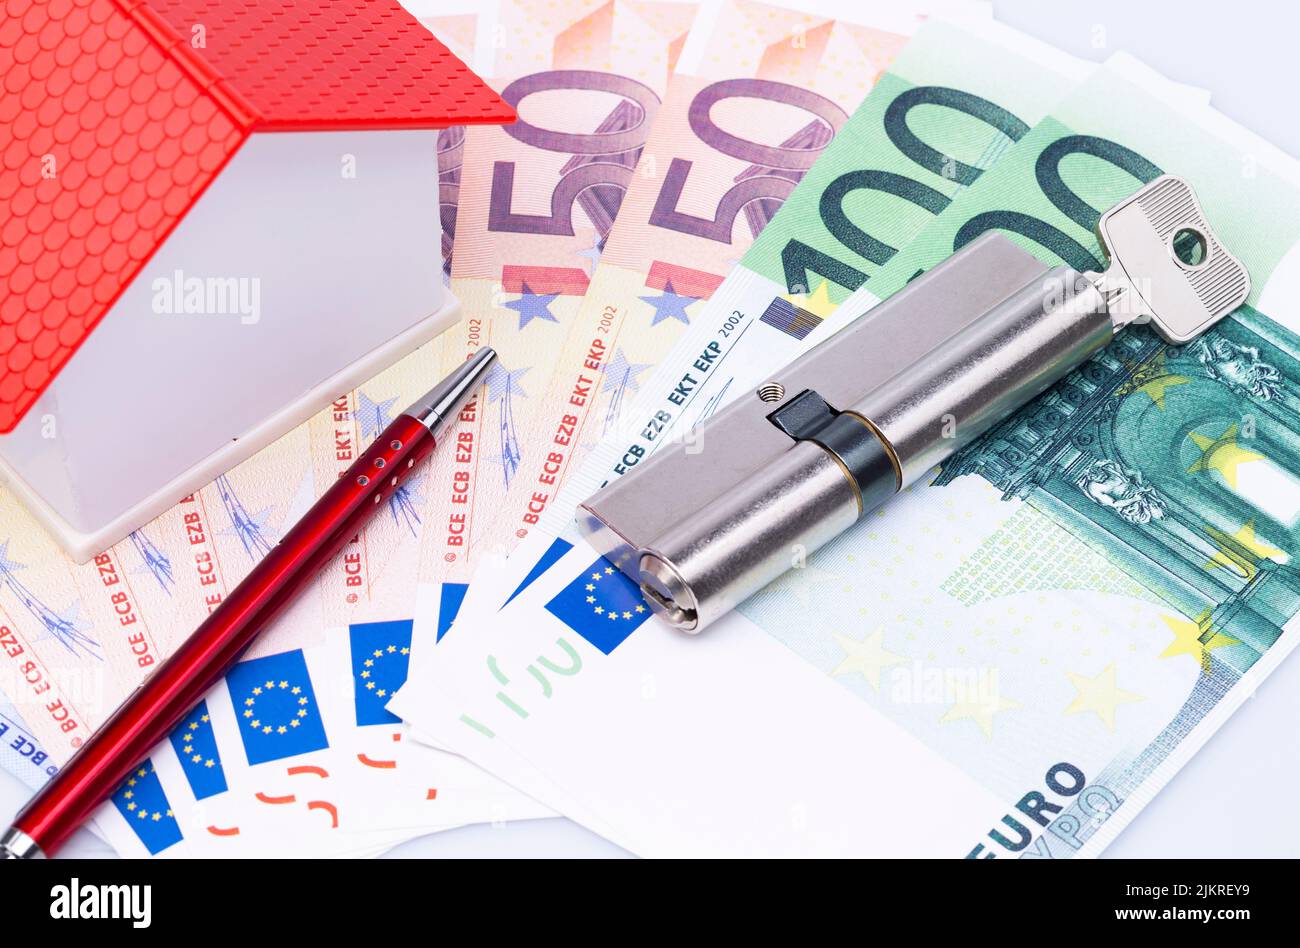 Concept image with model house, lock cylinder, ball pen and banknotes Stock Photo